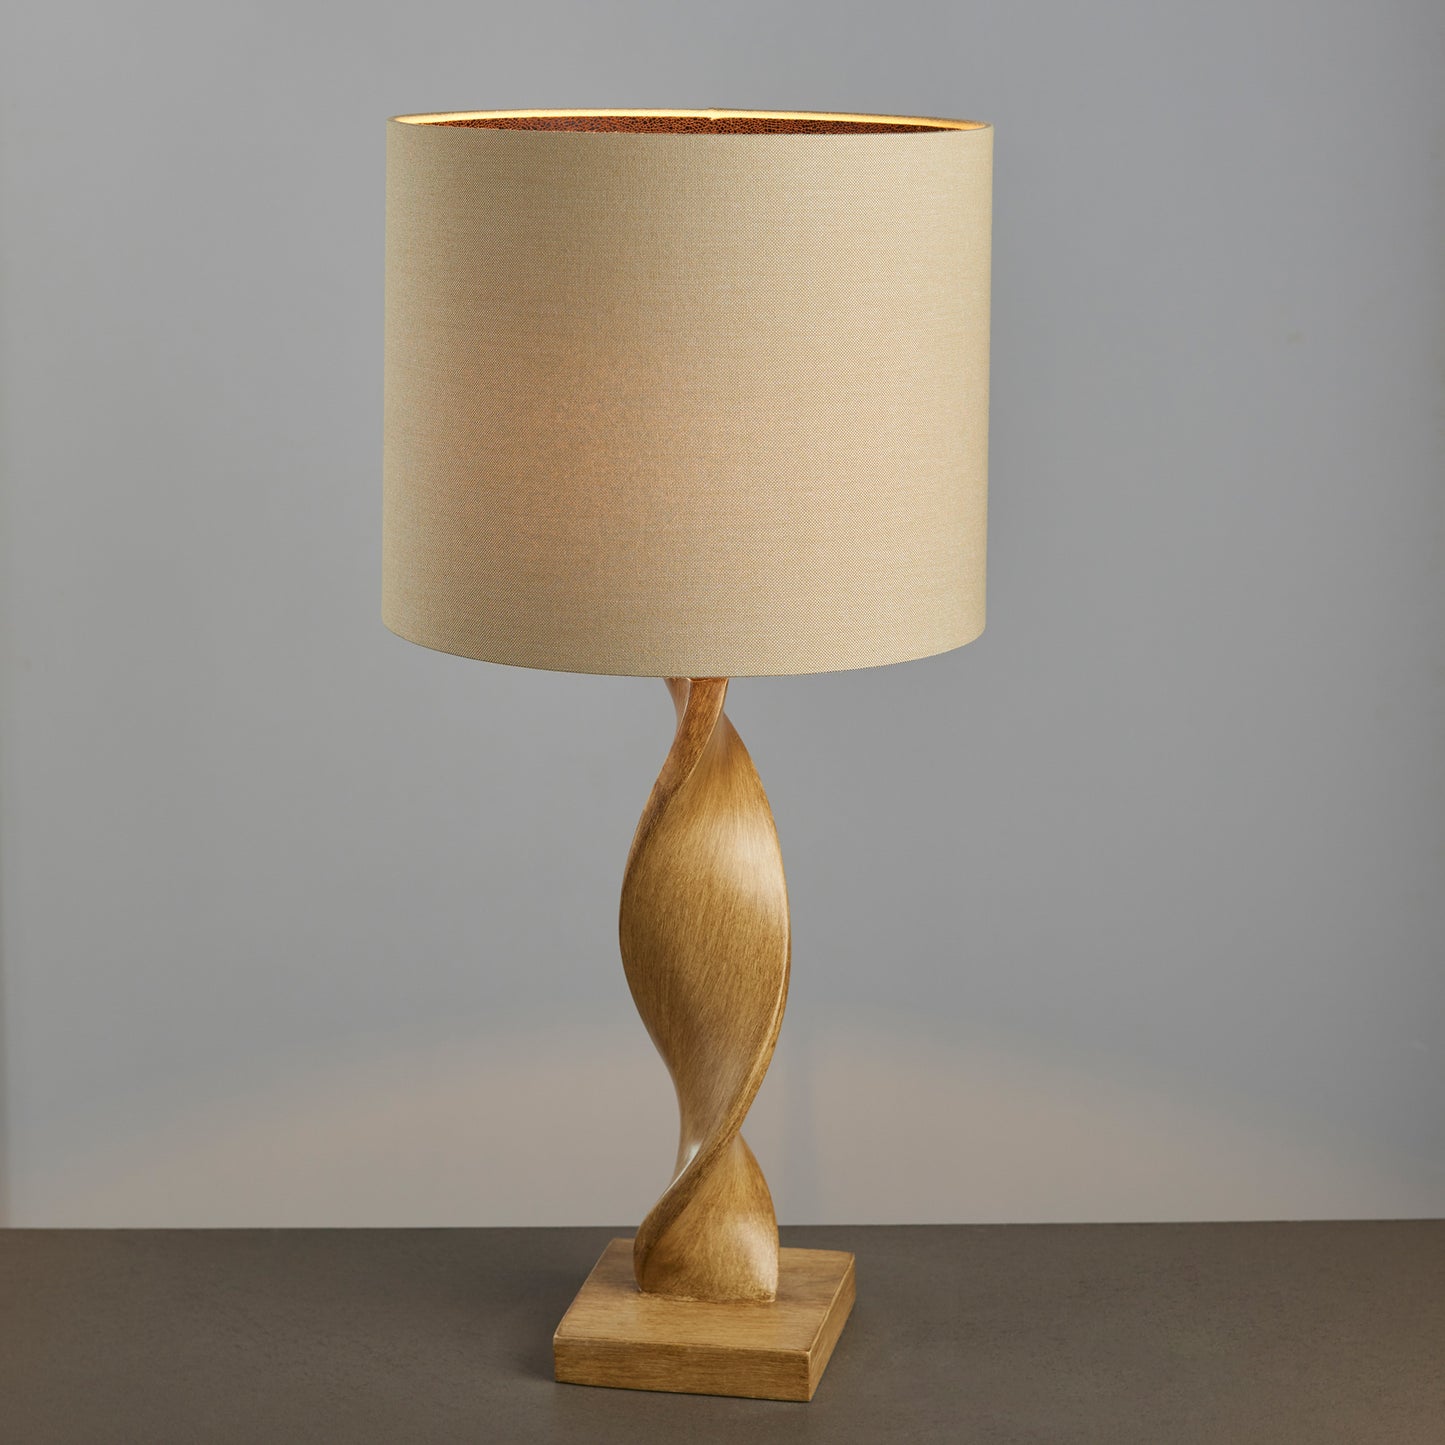 An Ash Table Lamp from Kikiathome.co.uk, perfect for interior decor.